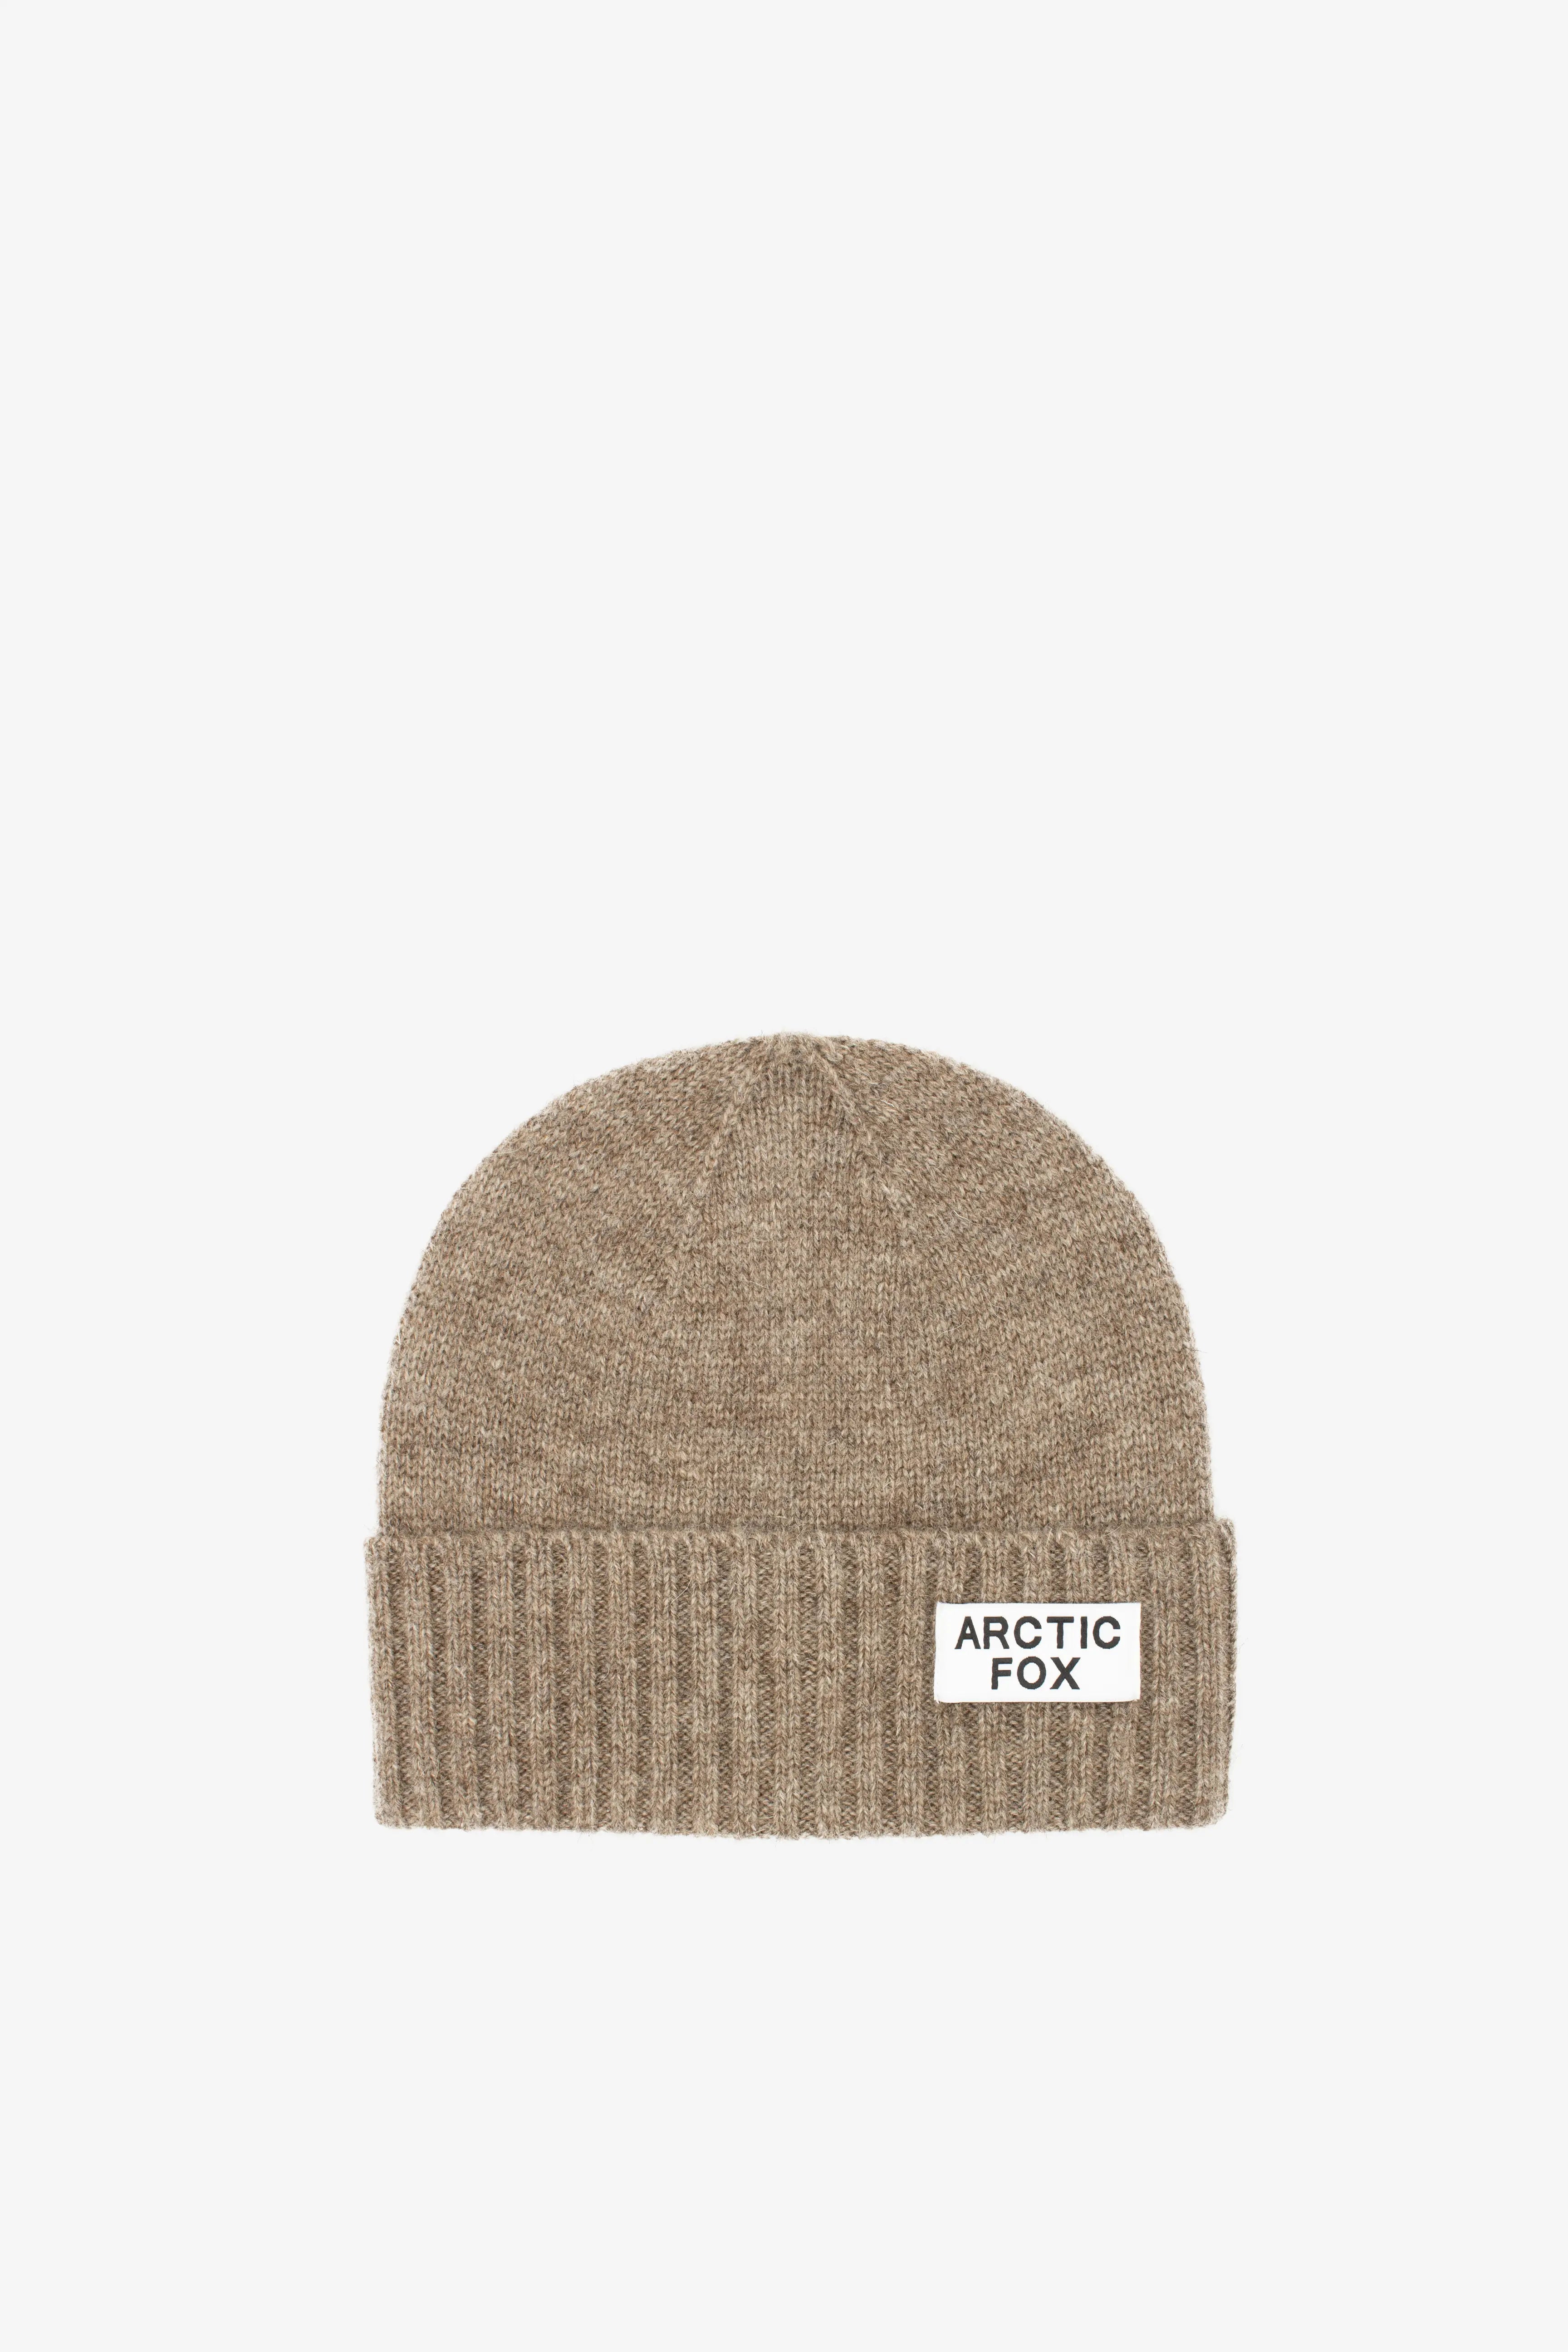 arctic fox and co, made in the UK, Responsible standard wool certified high welfare wool beanie, wolf brown, light brown, oatmeal, womens beanie hat, sustainable and ethical fashion, curate